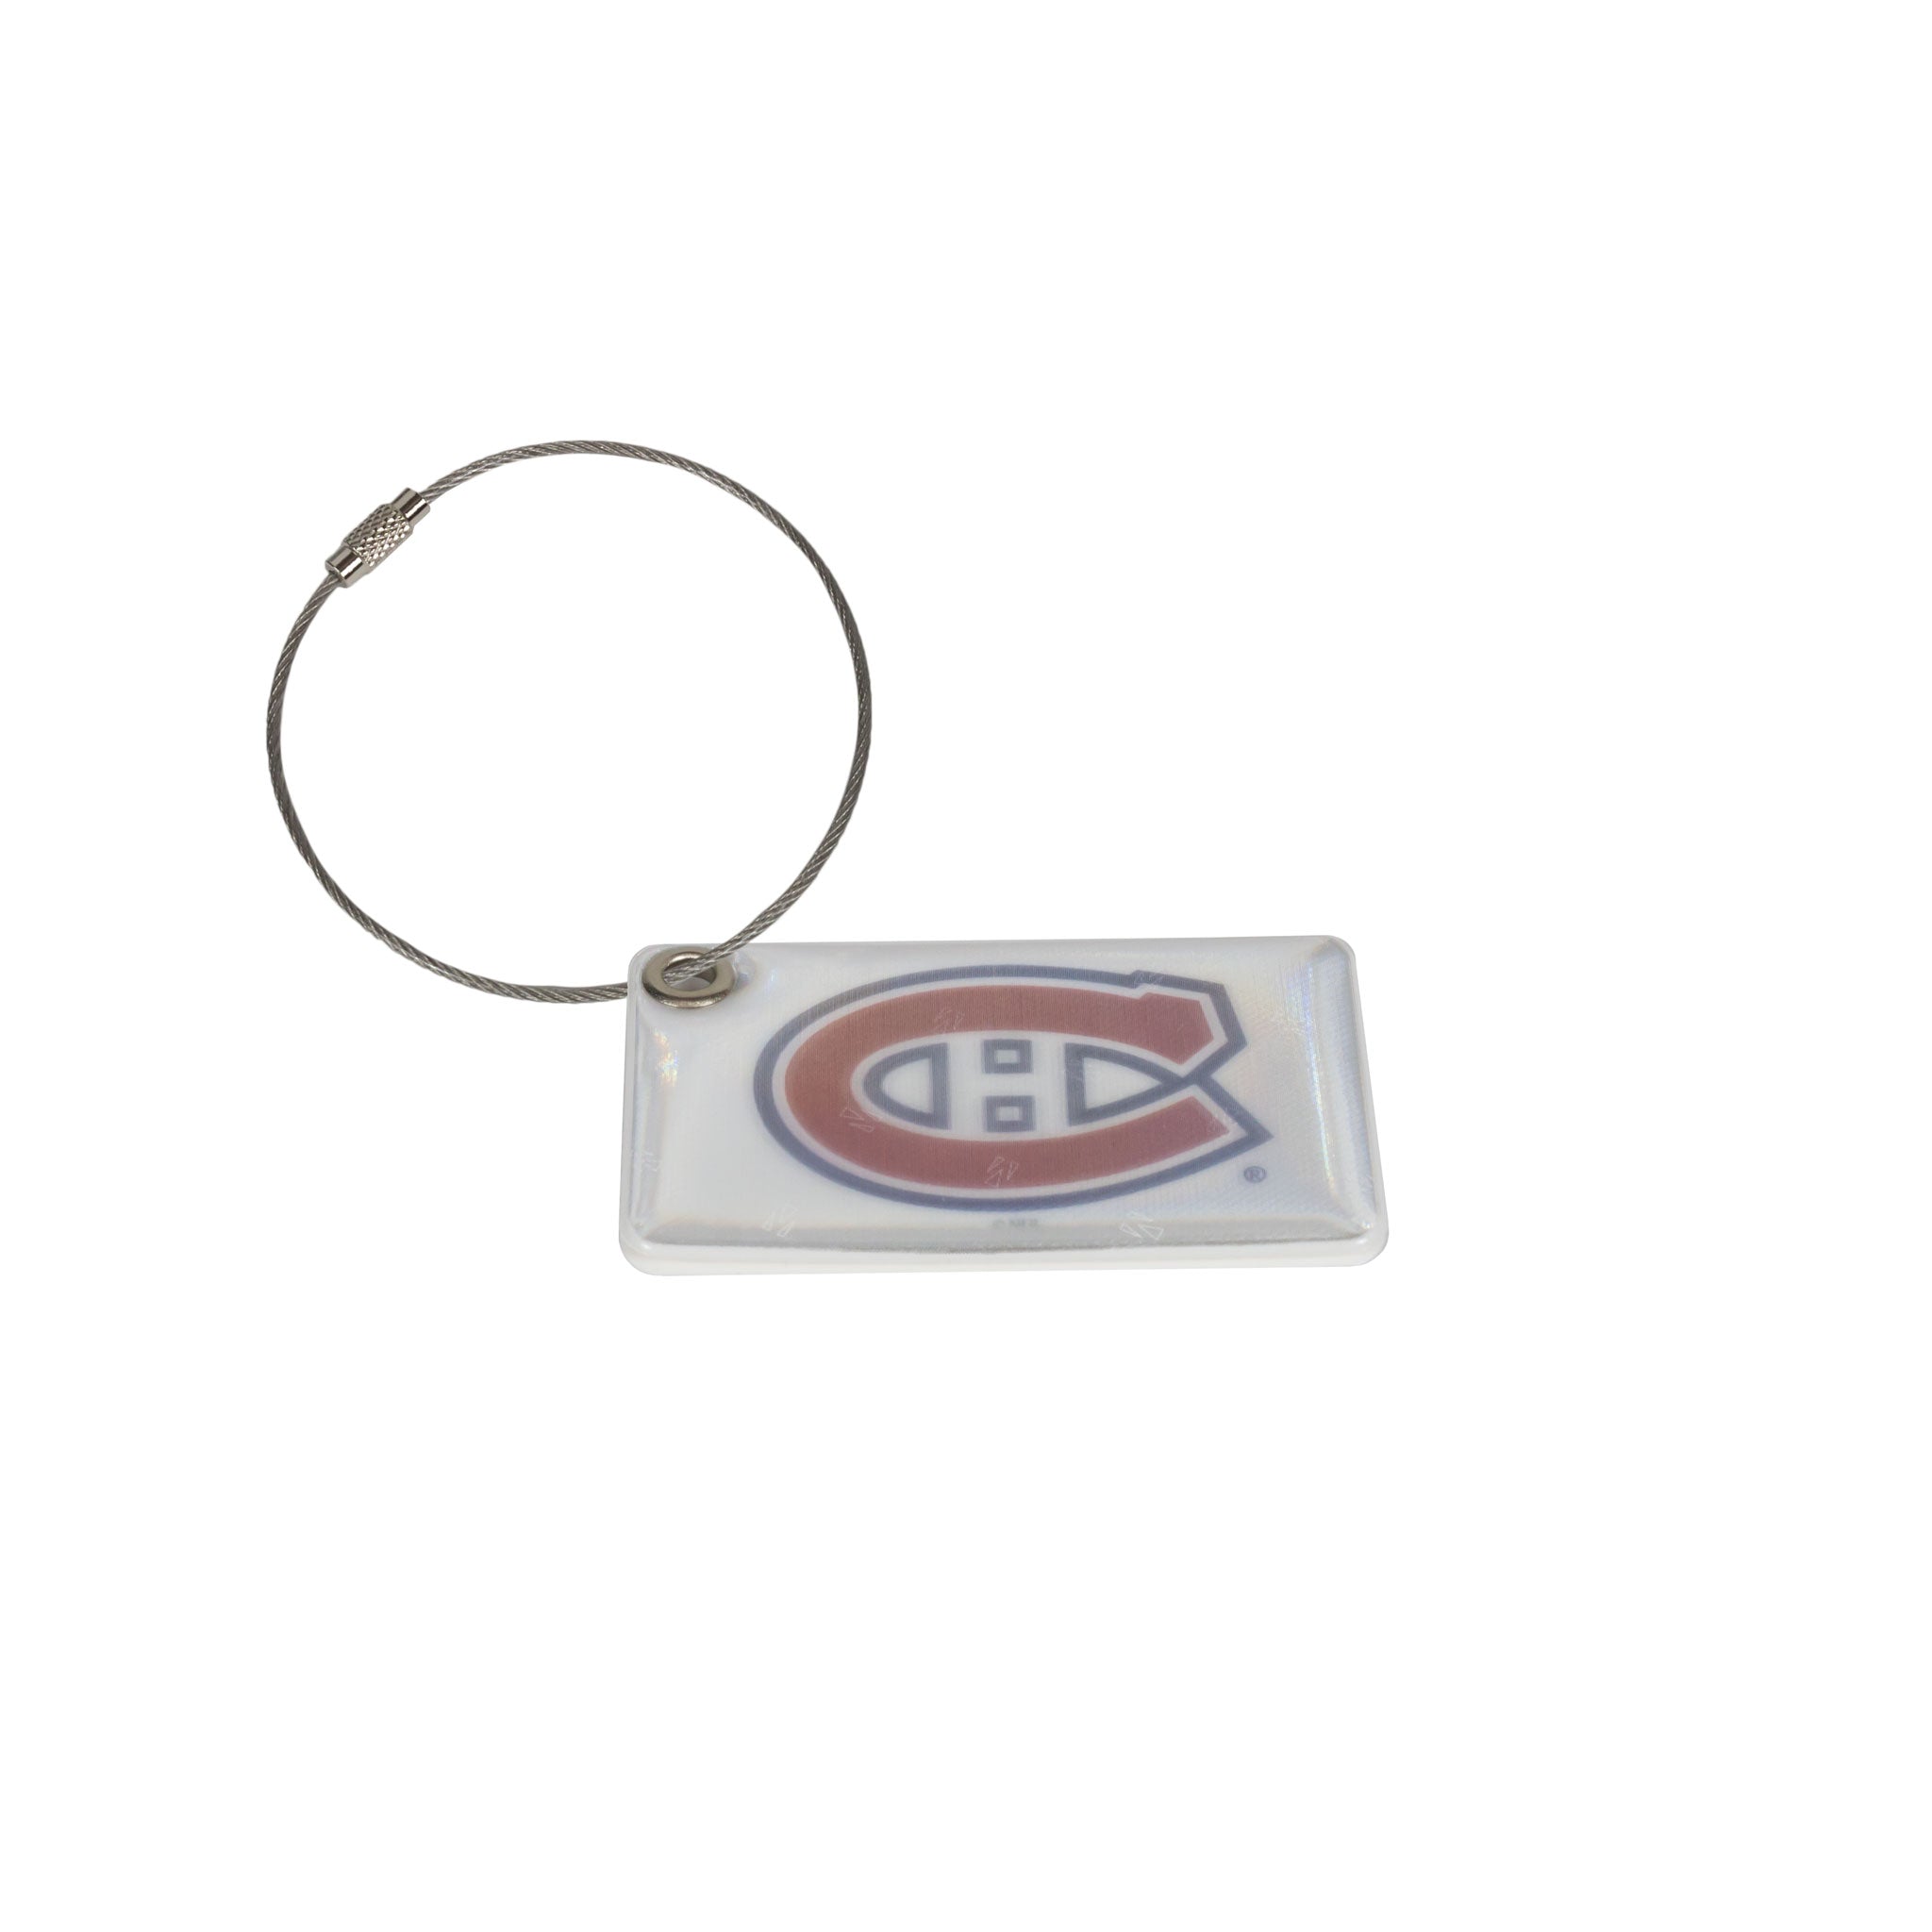 Montreal_Canadiens_Luggage_Tag_Closed